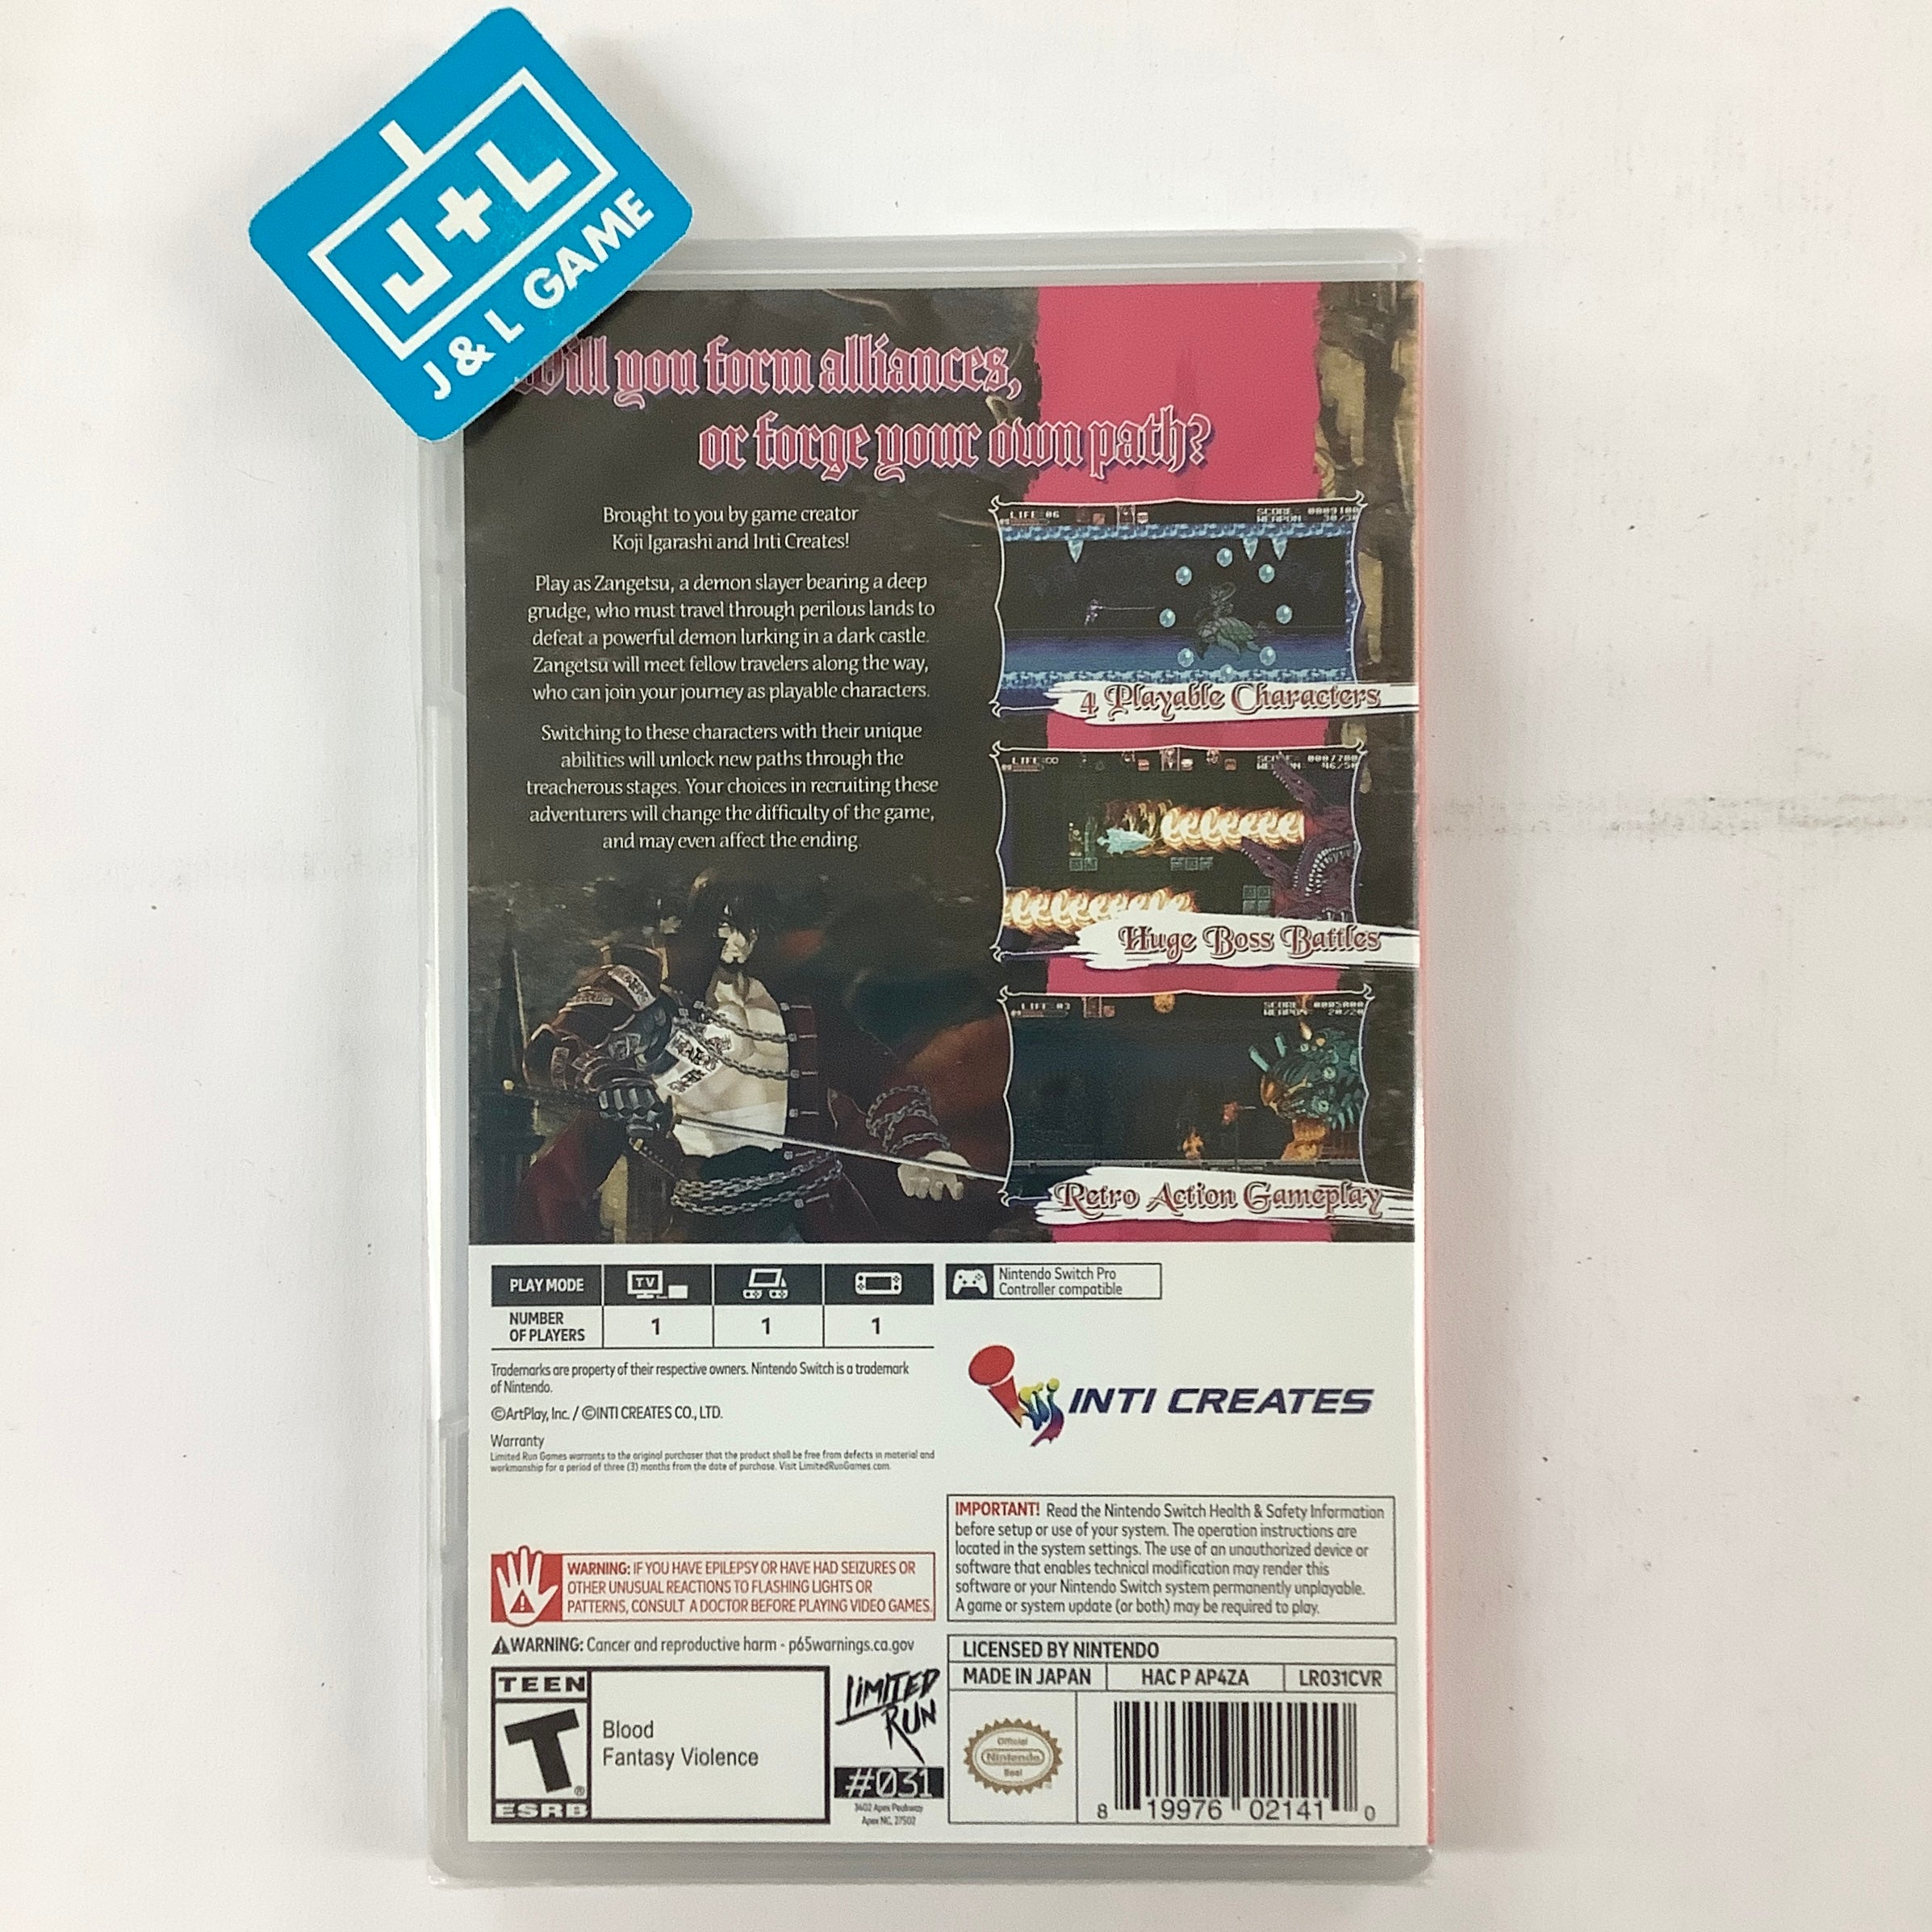 Bloodstained: Curse of the Moon (Limited Run #031) - (NSW) Nintendo Switch Video Games Limited Run Games   